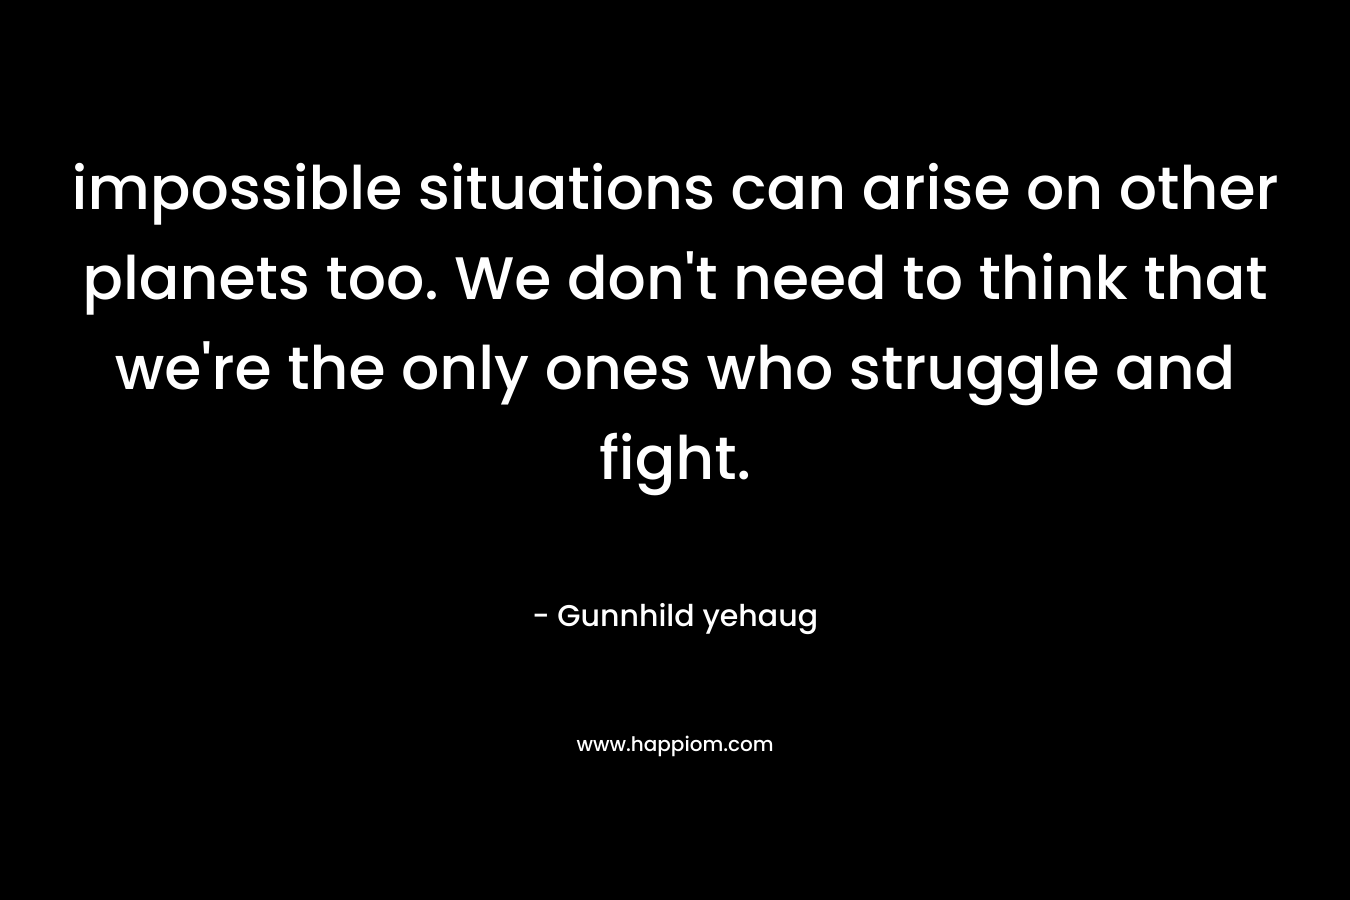 impossible situations can arise on other planets too. We don’t need to think that we’re the only ones who struggle and fight. – Gunnhild yehaug